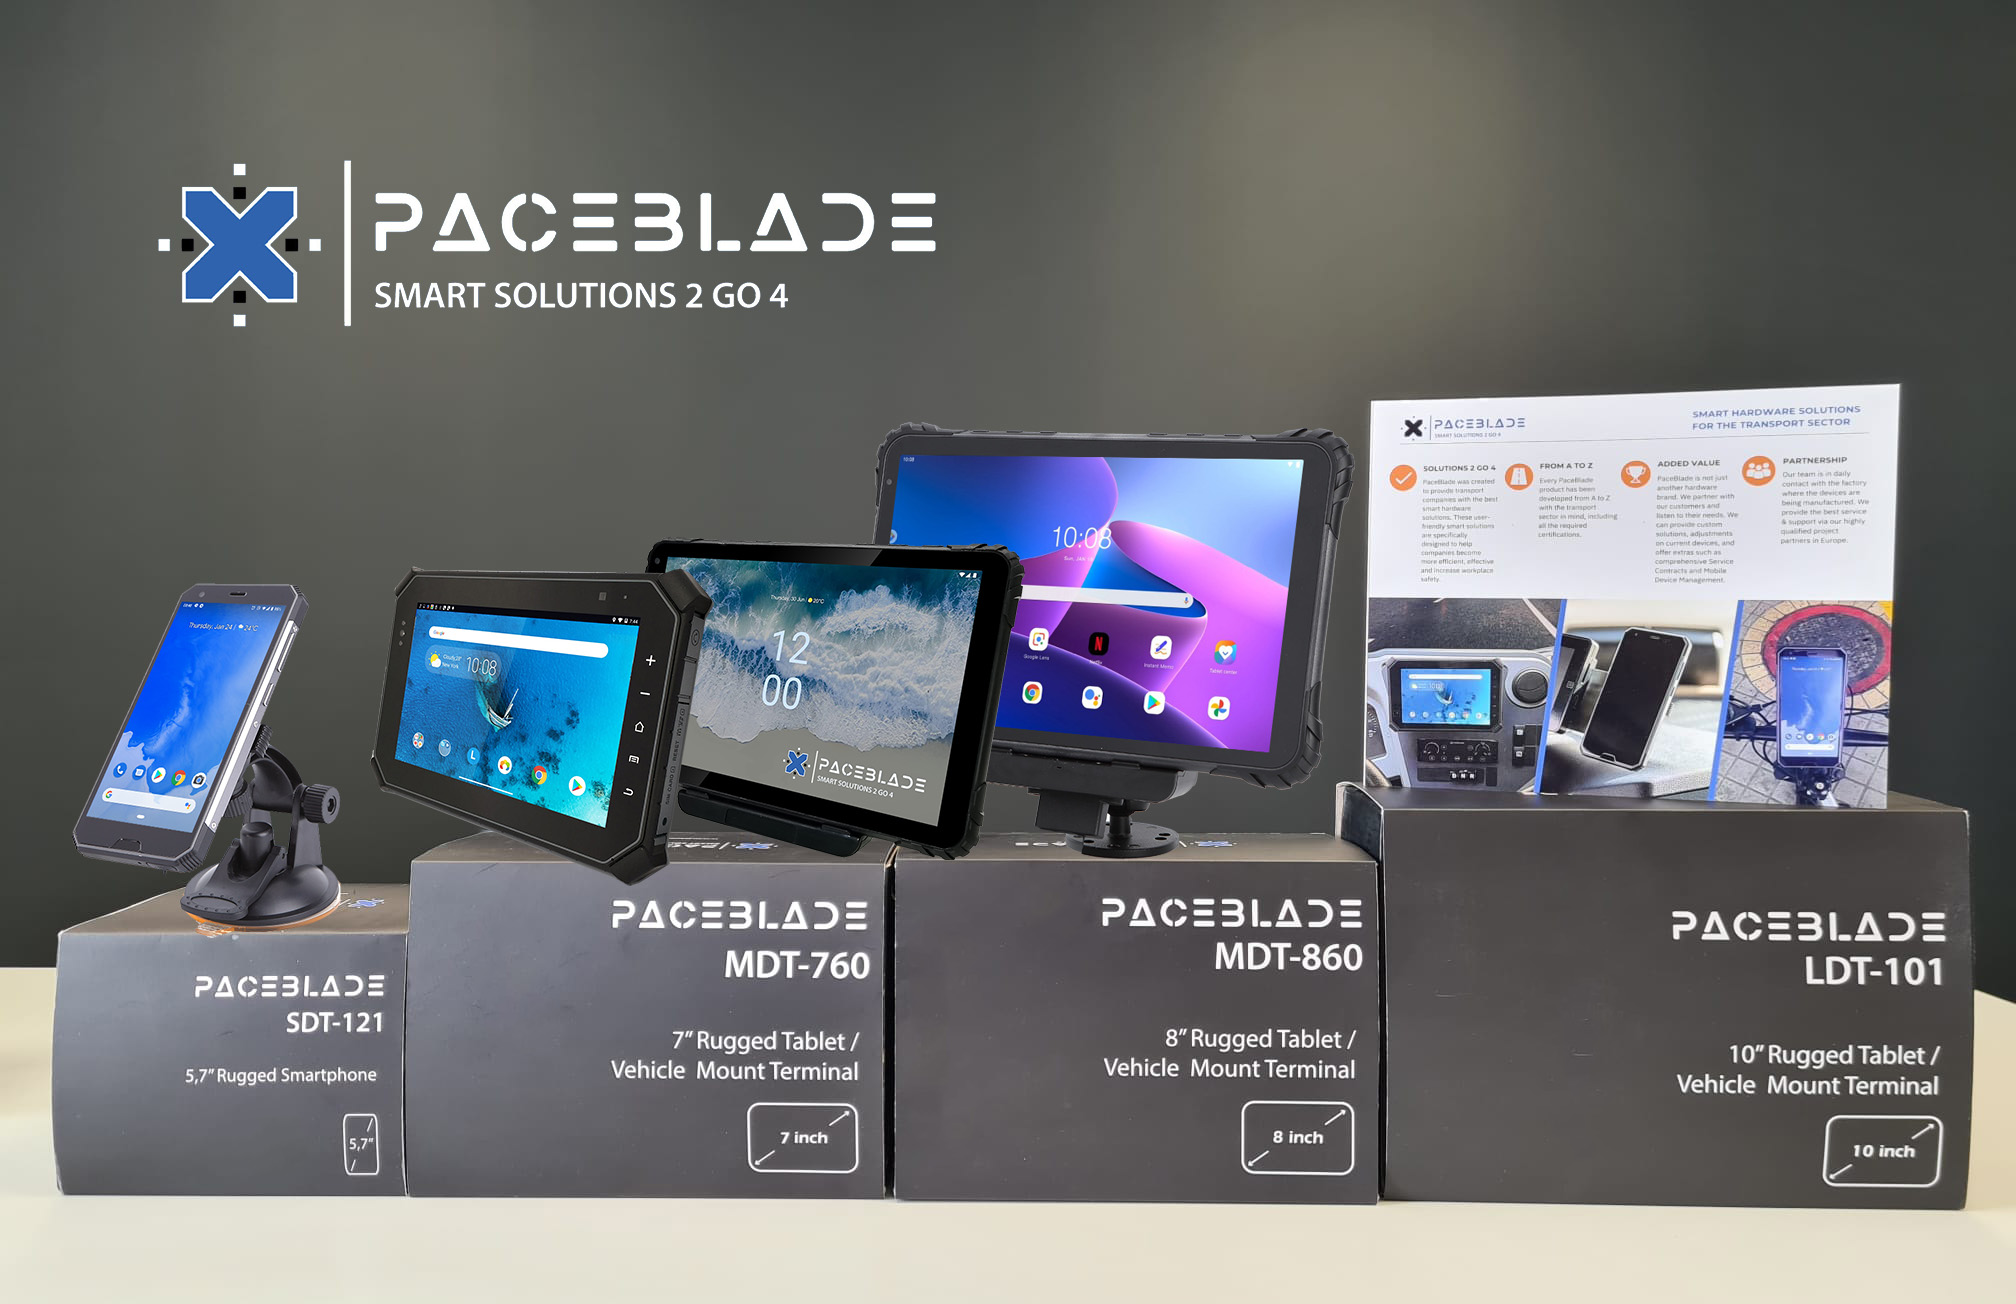 PaceBlade product line-up